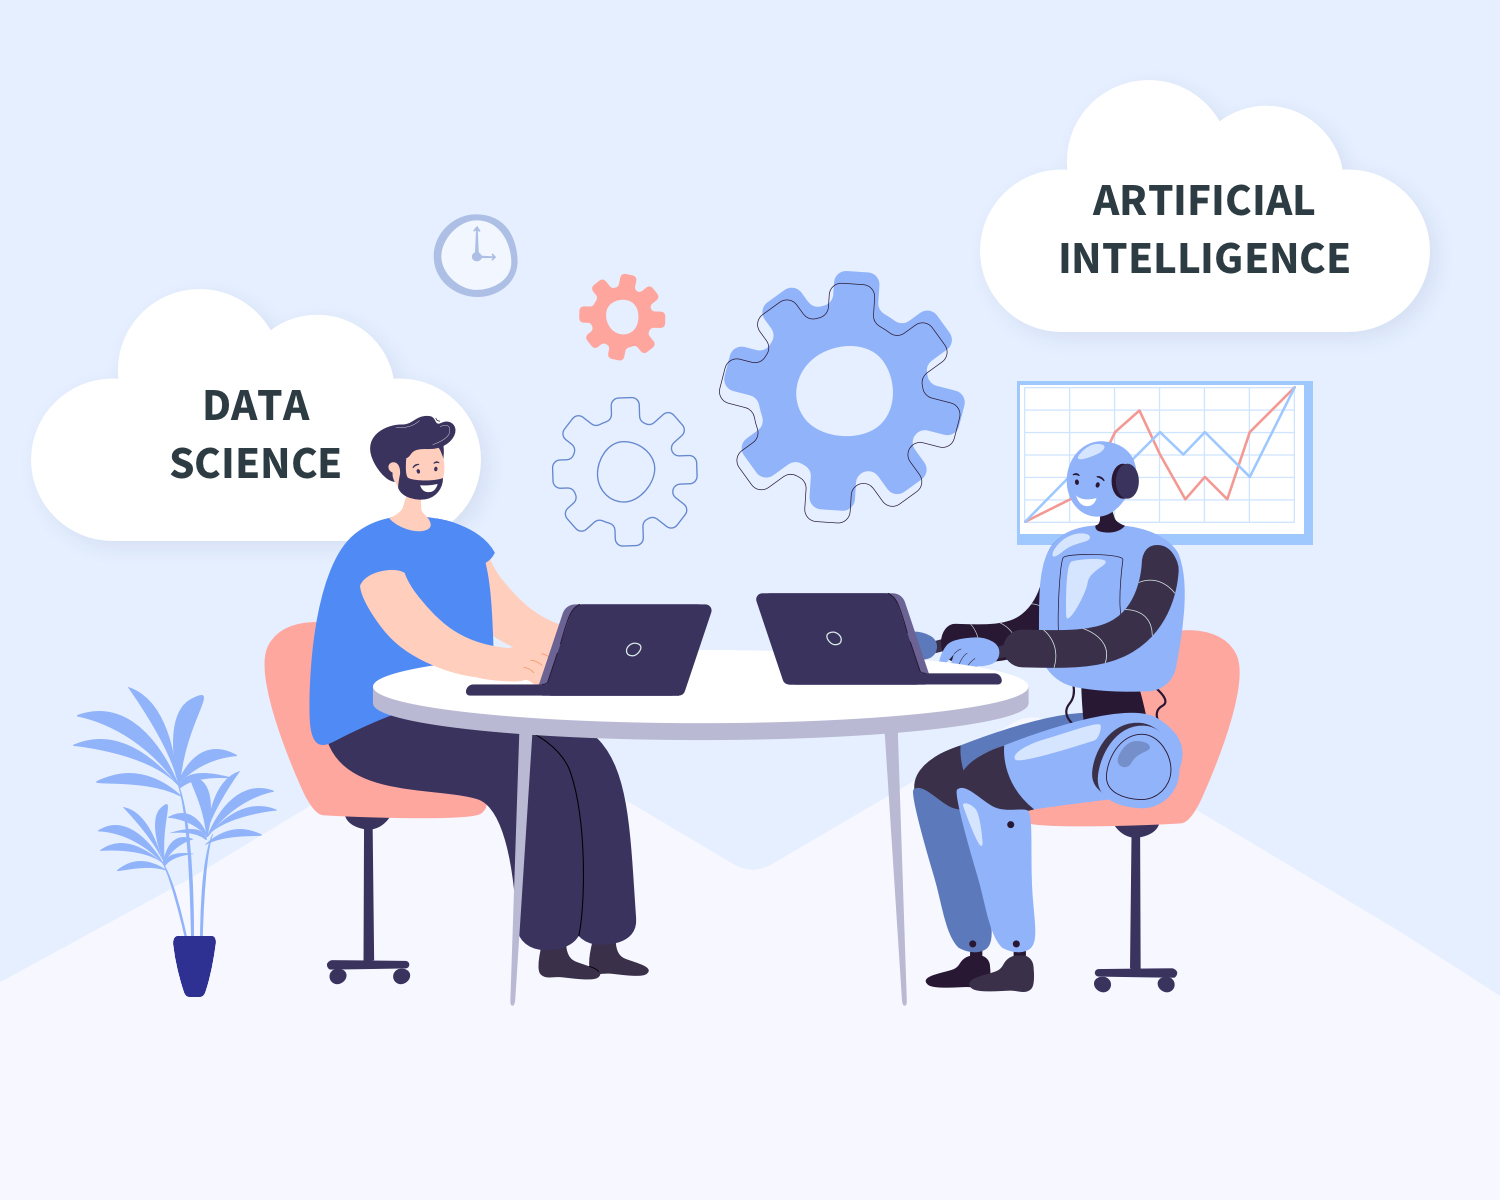 Understanding the difference between Data Science vs Artificial Intelligence